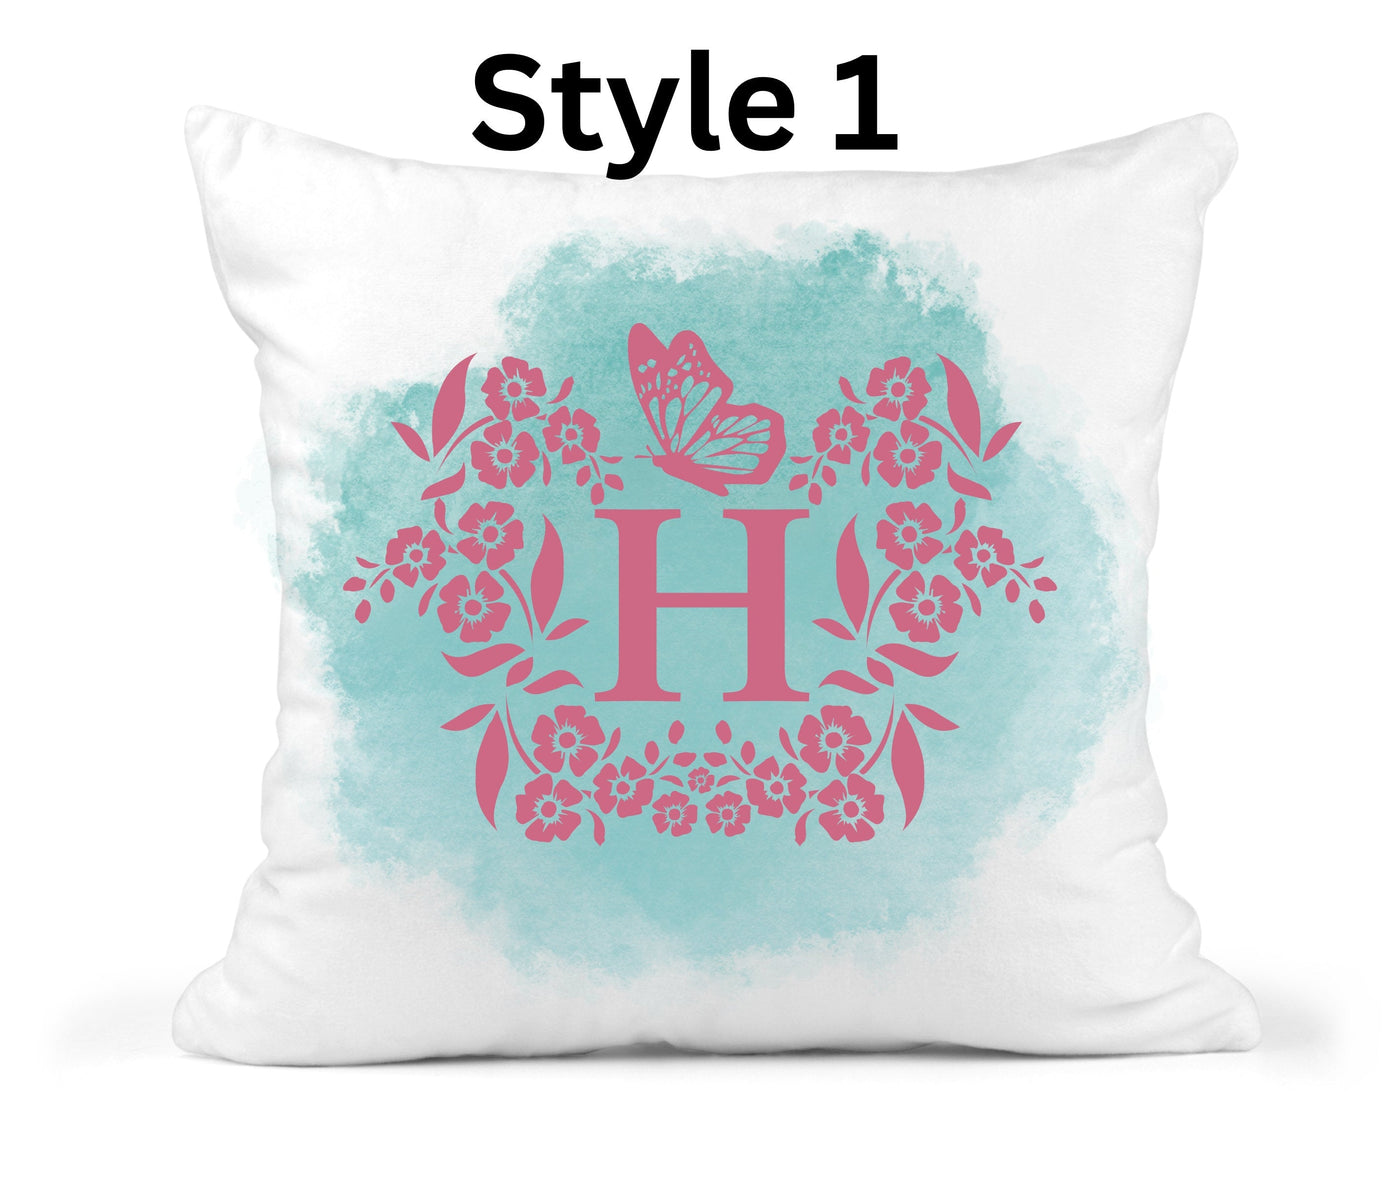 Personalized Throw Pillow Black Girl Stopping to smell the flowers Hand Drawn